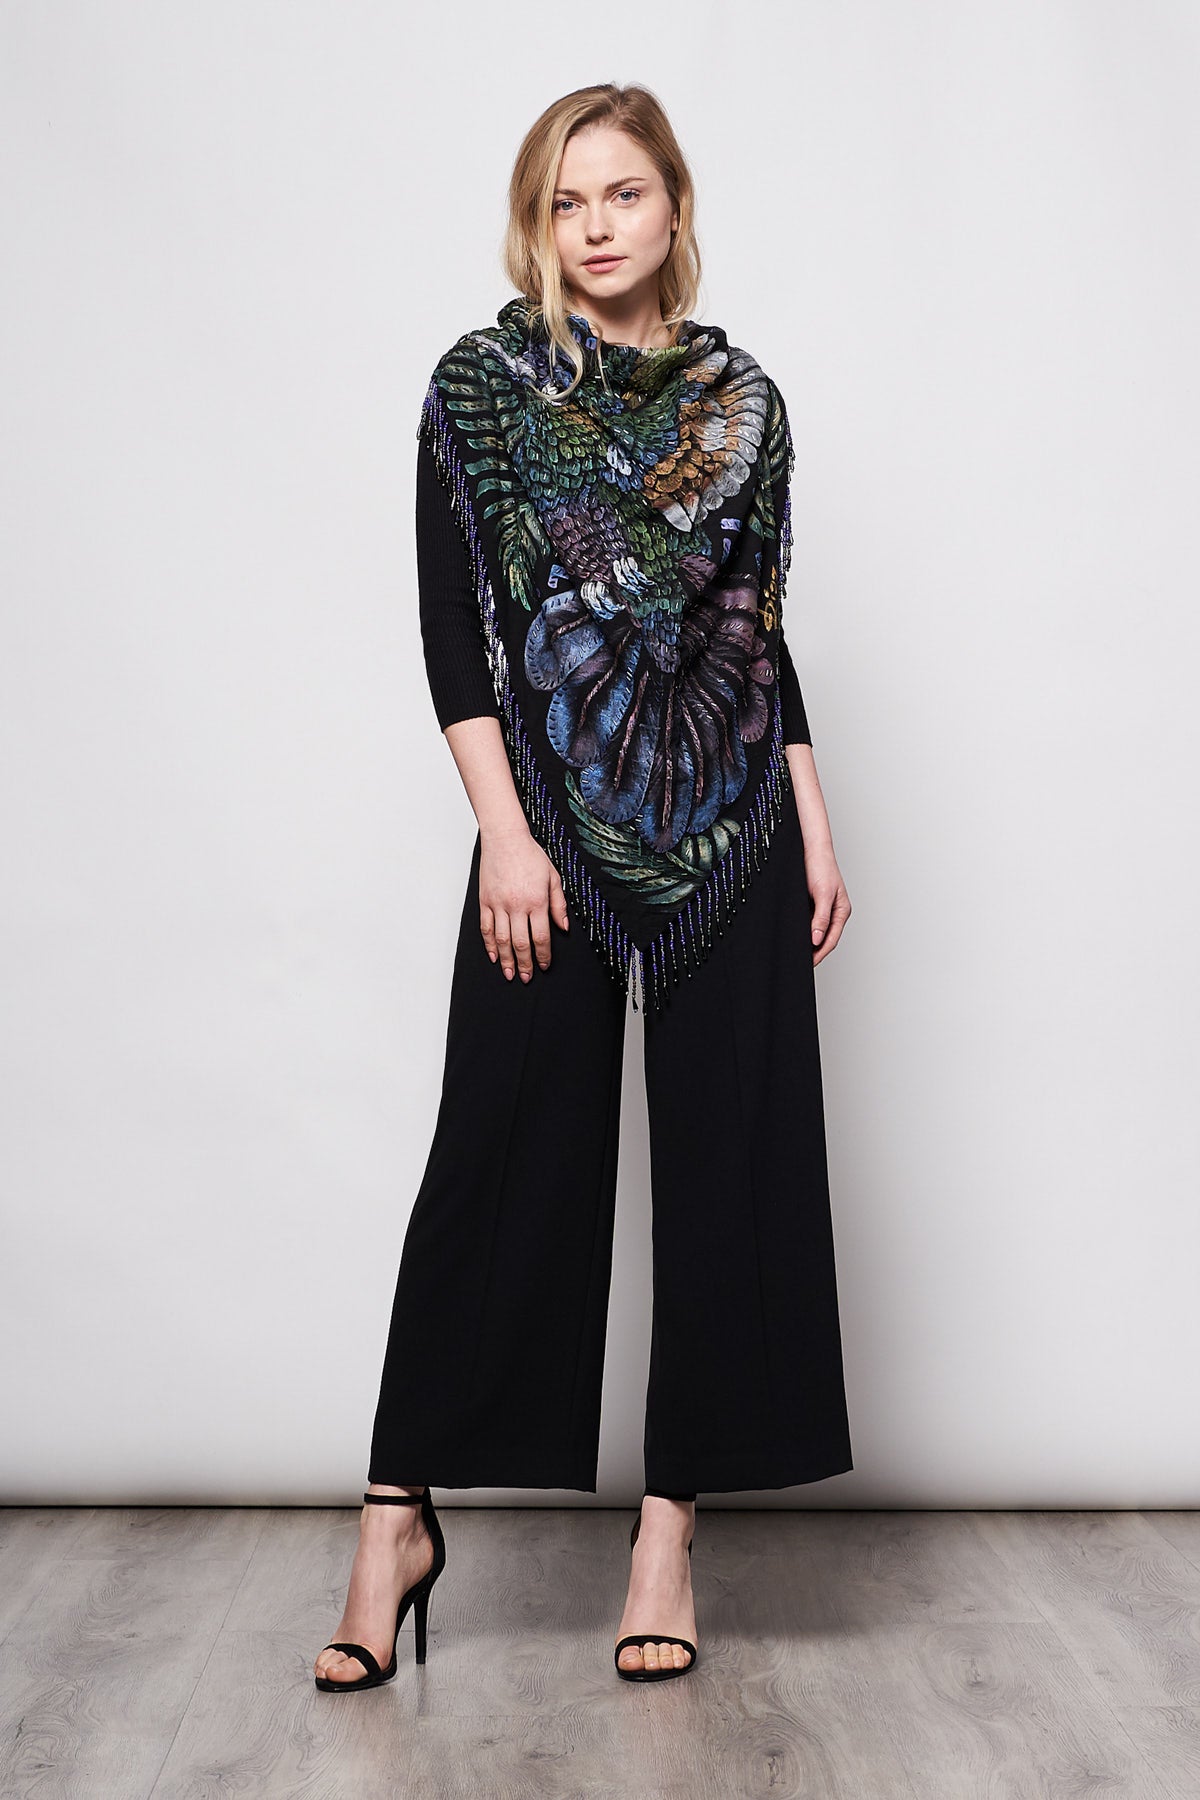 HAND-PAINTED AND HAND-EMBROIDERED TRIANGULAR SHAWL WITH BEADED FRINGE - COLIBRI